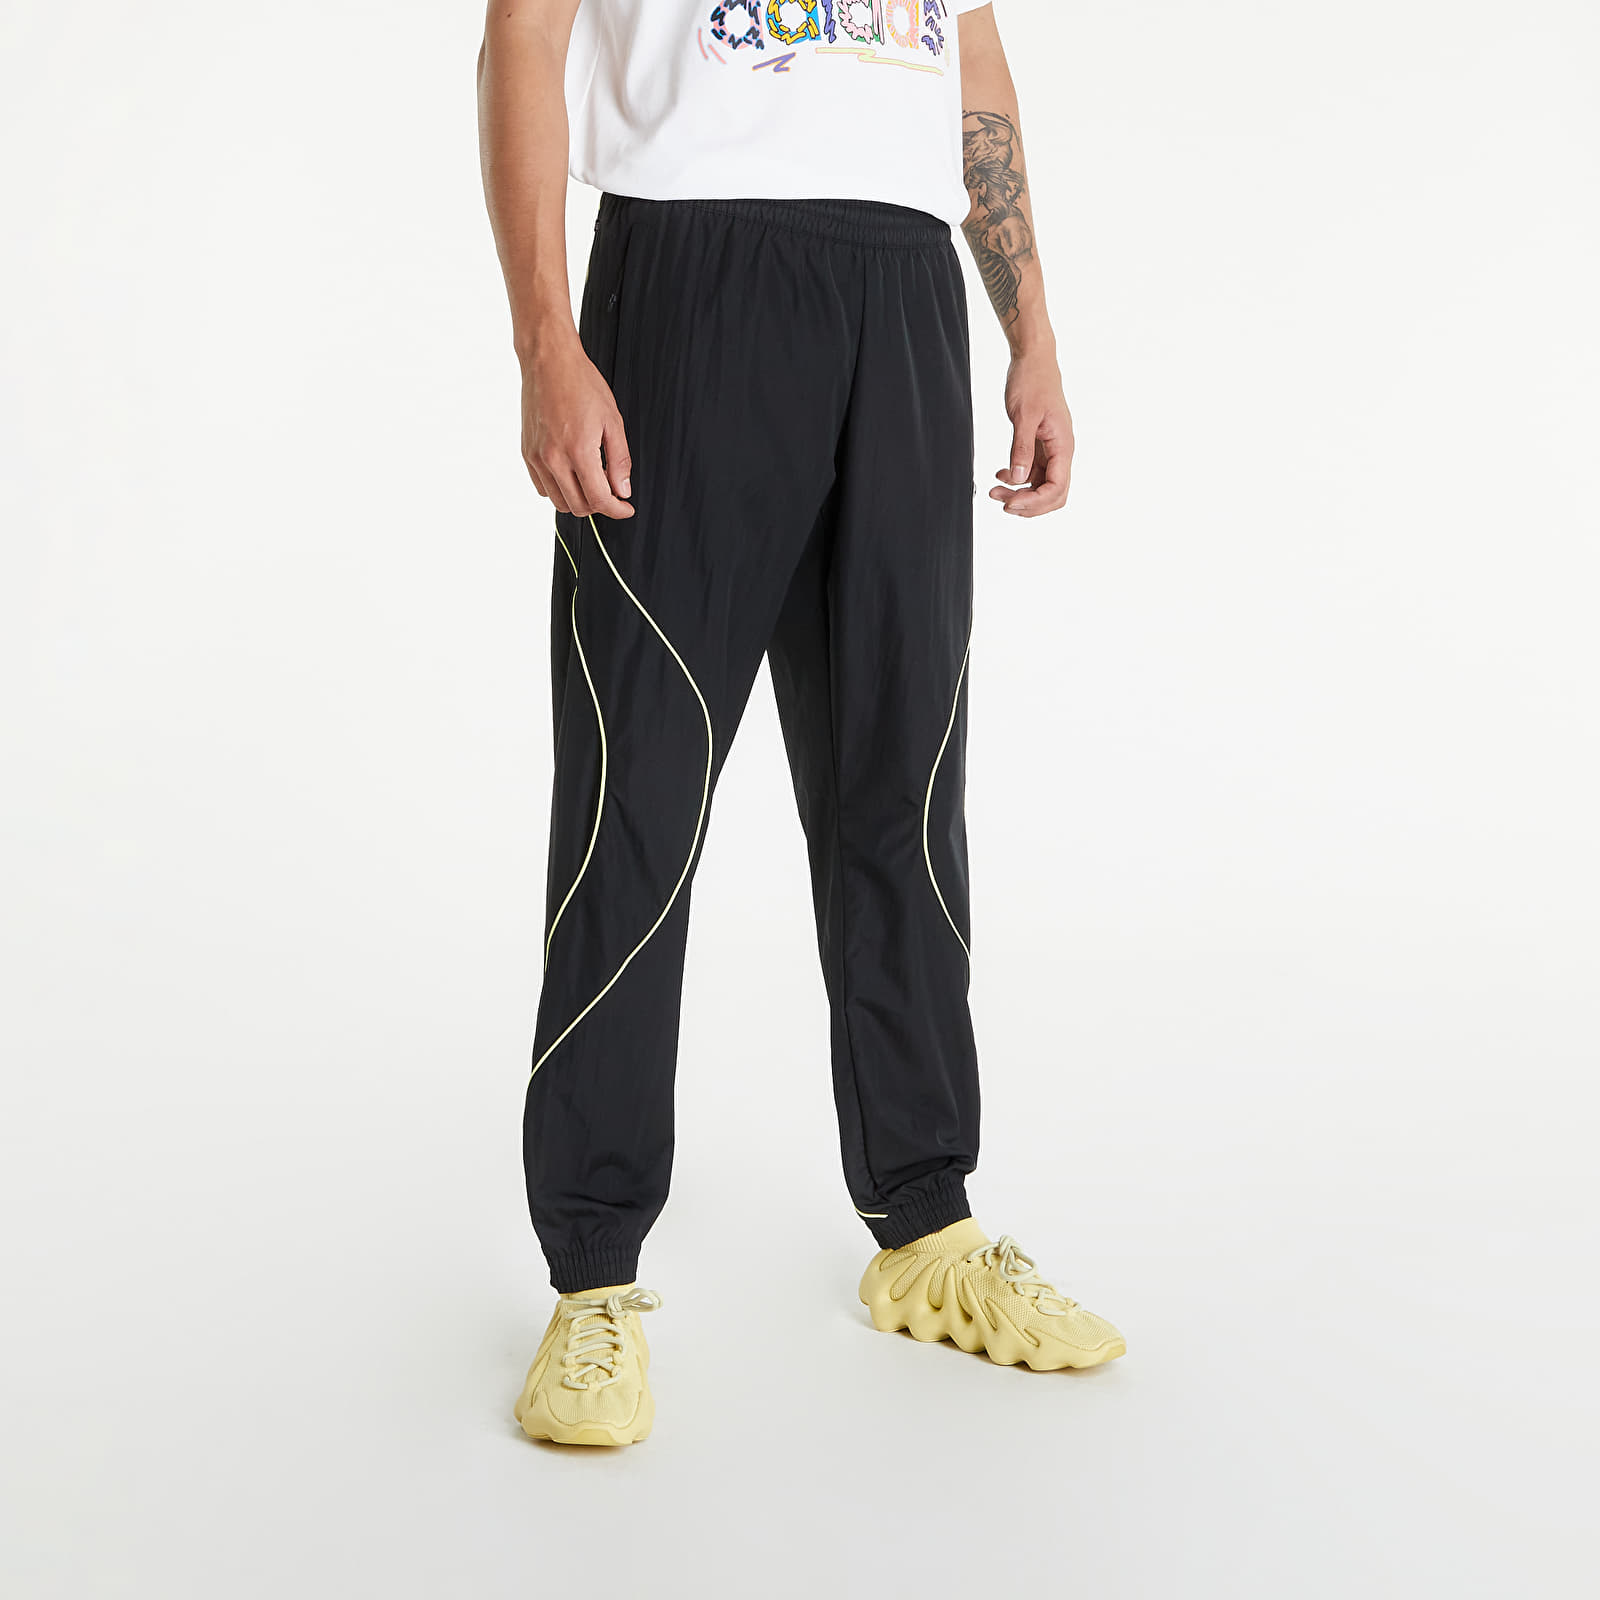 Pants and jeans adidas R.Y.V. Sport Pants Black